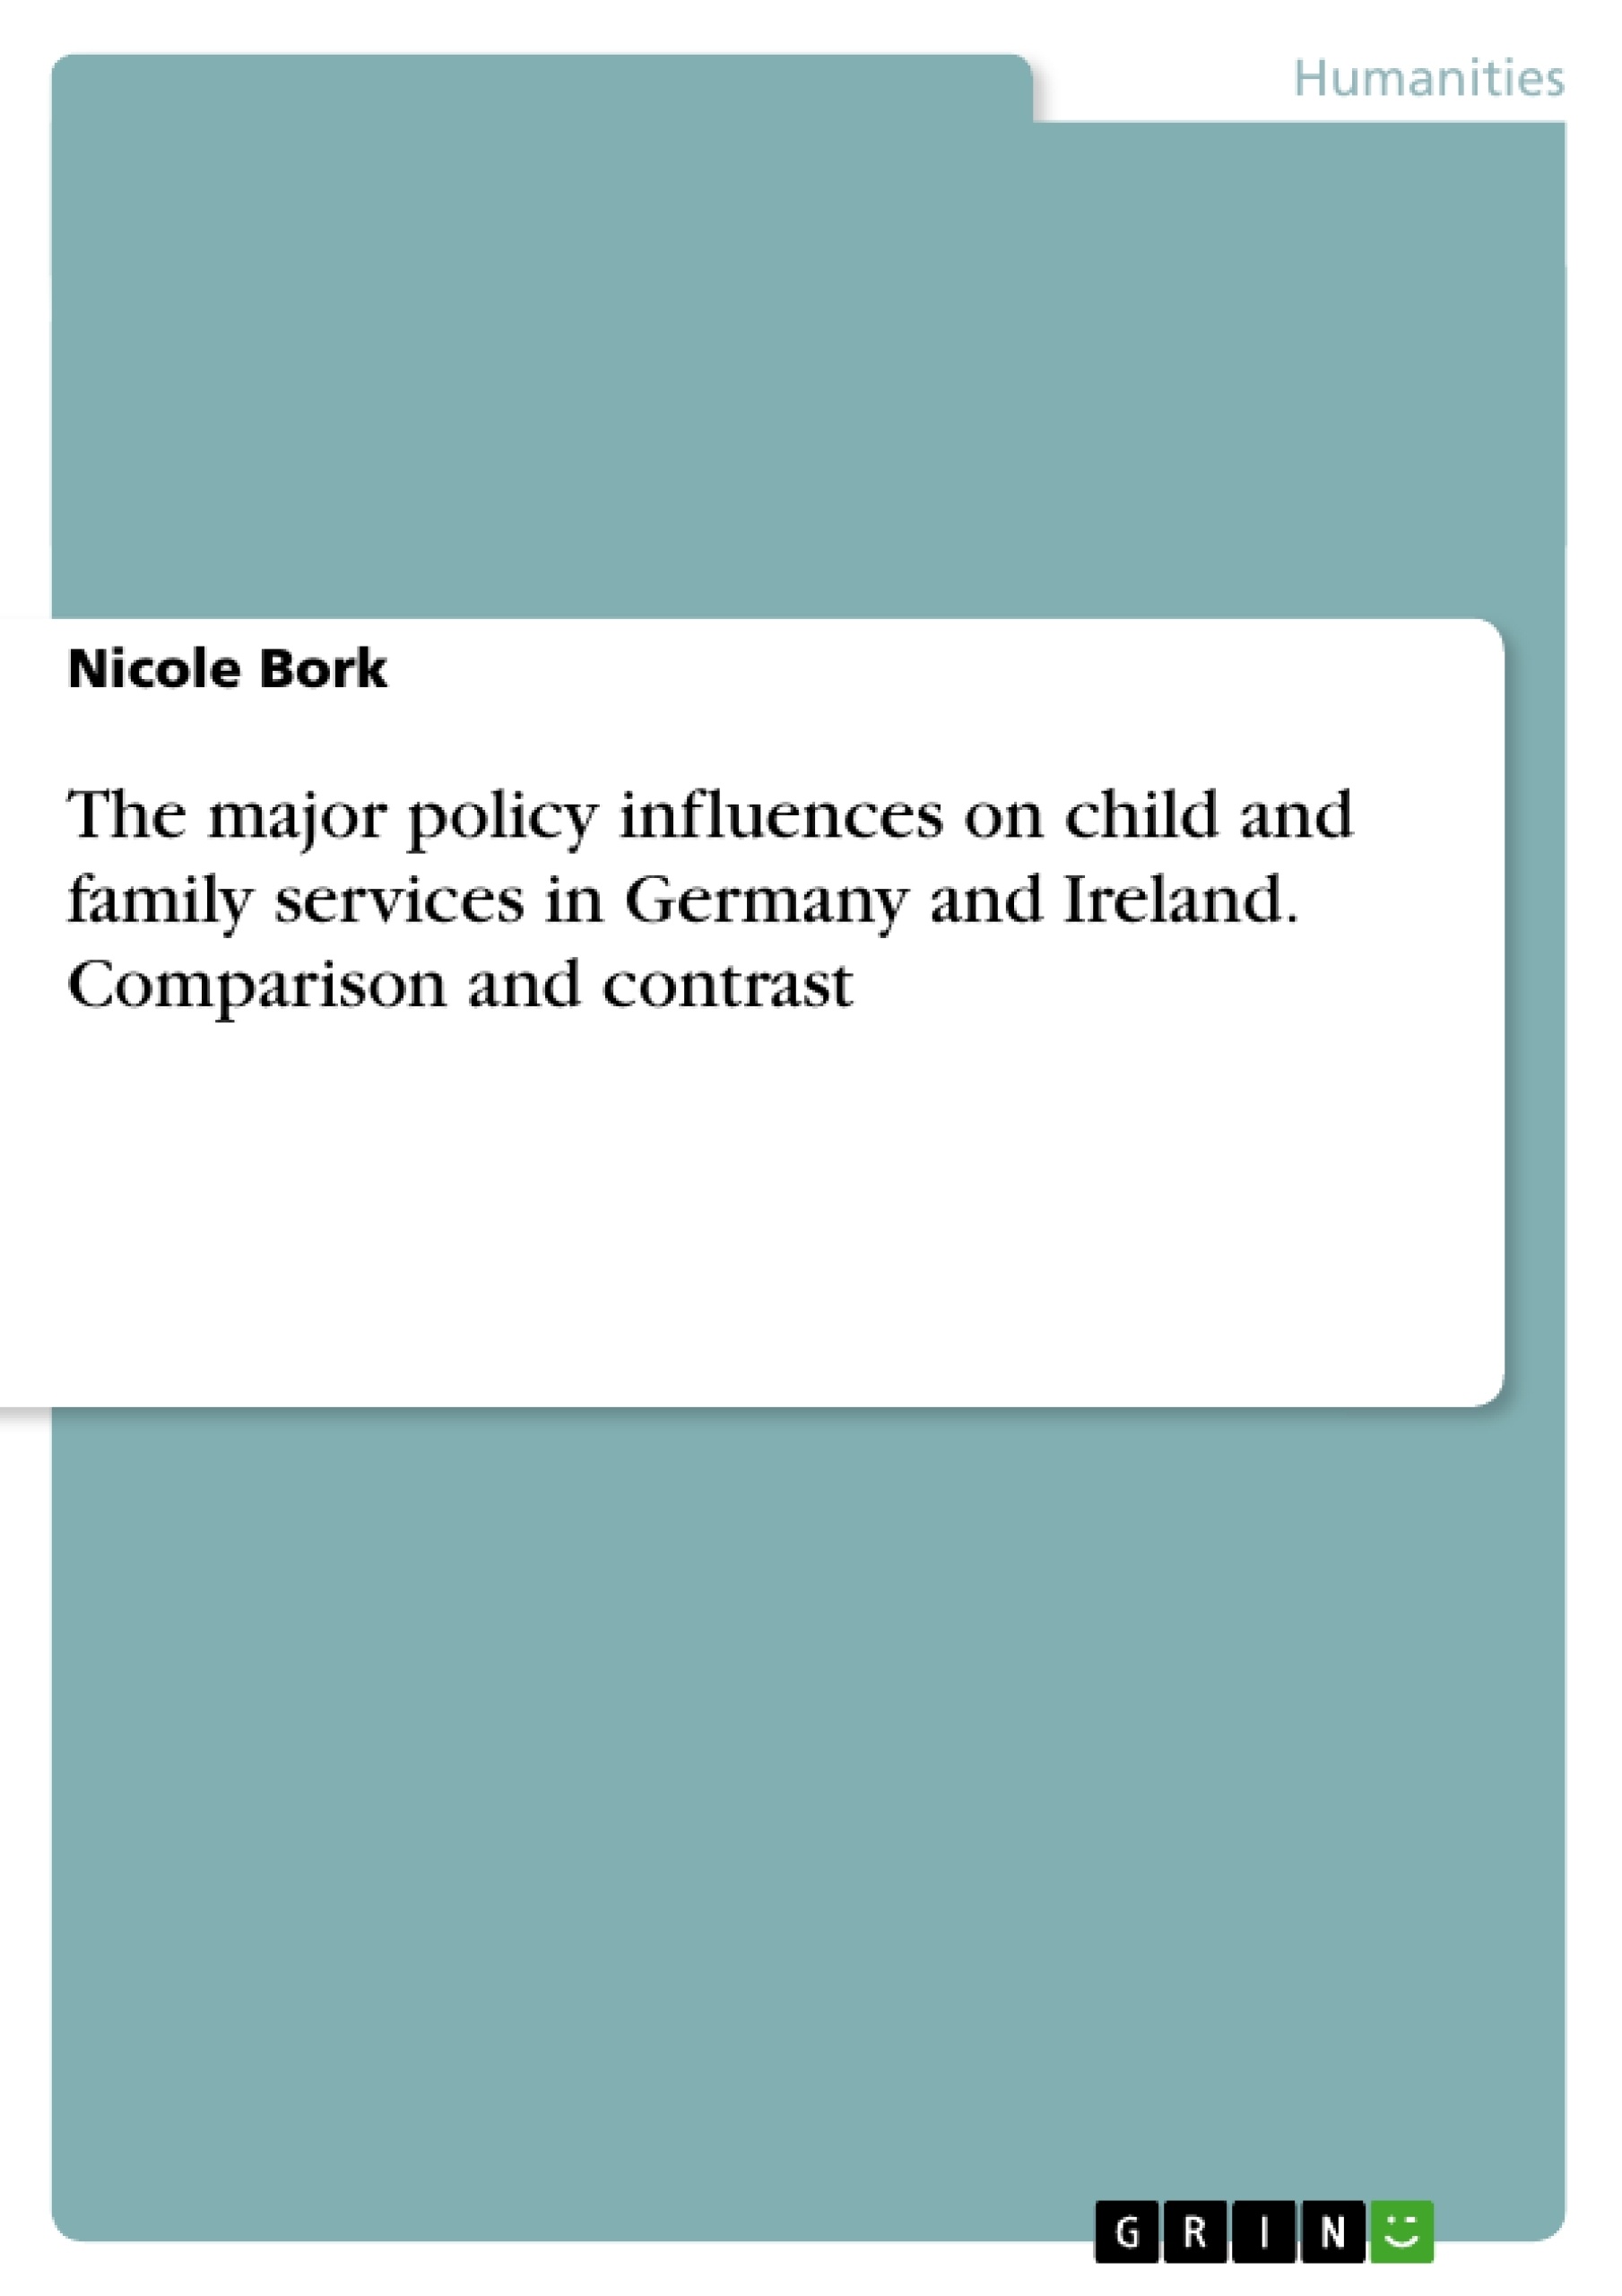 Título: The major policy influences on child and family services in Germany and Ireland. Comparison and contrast